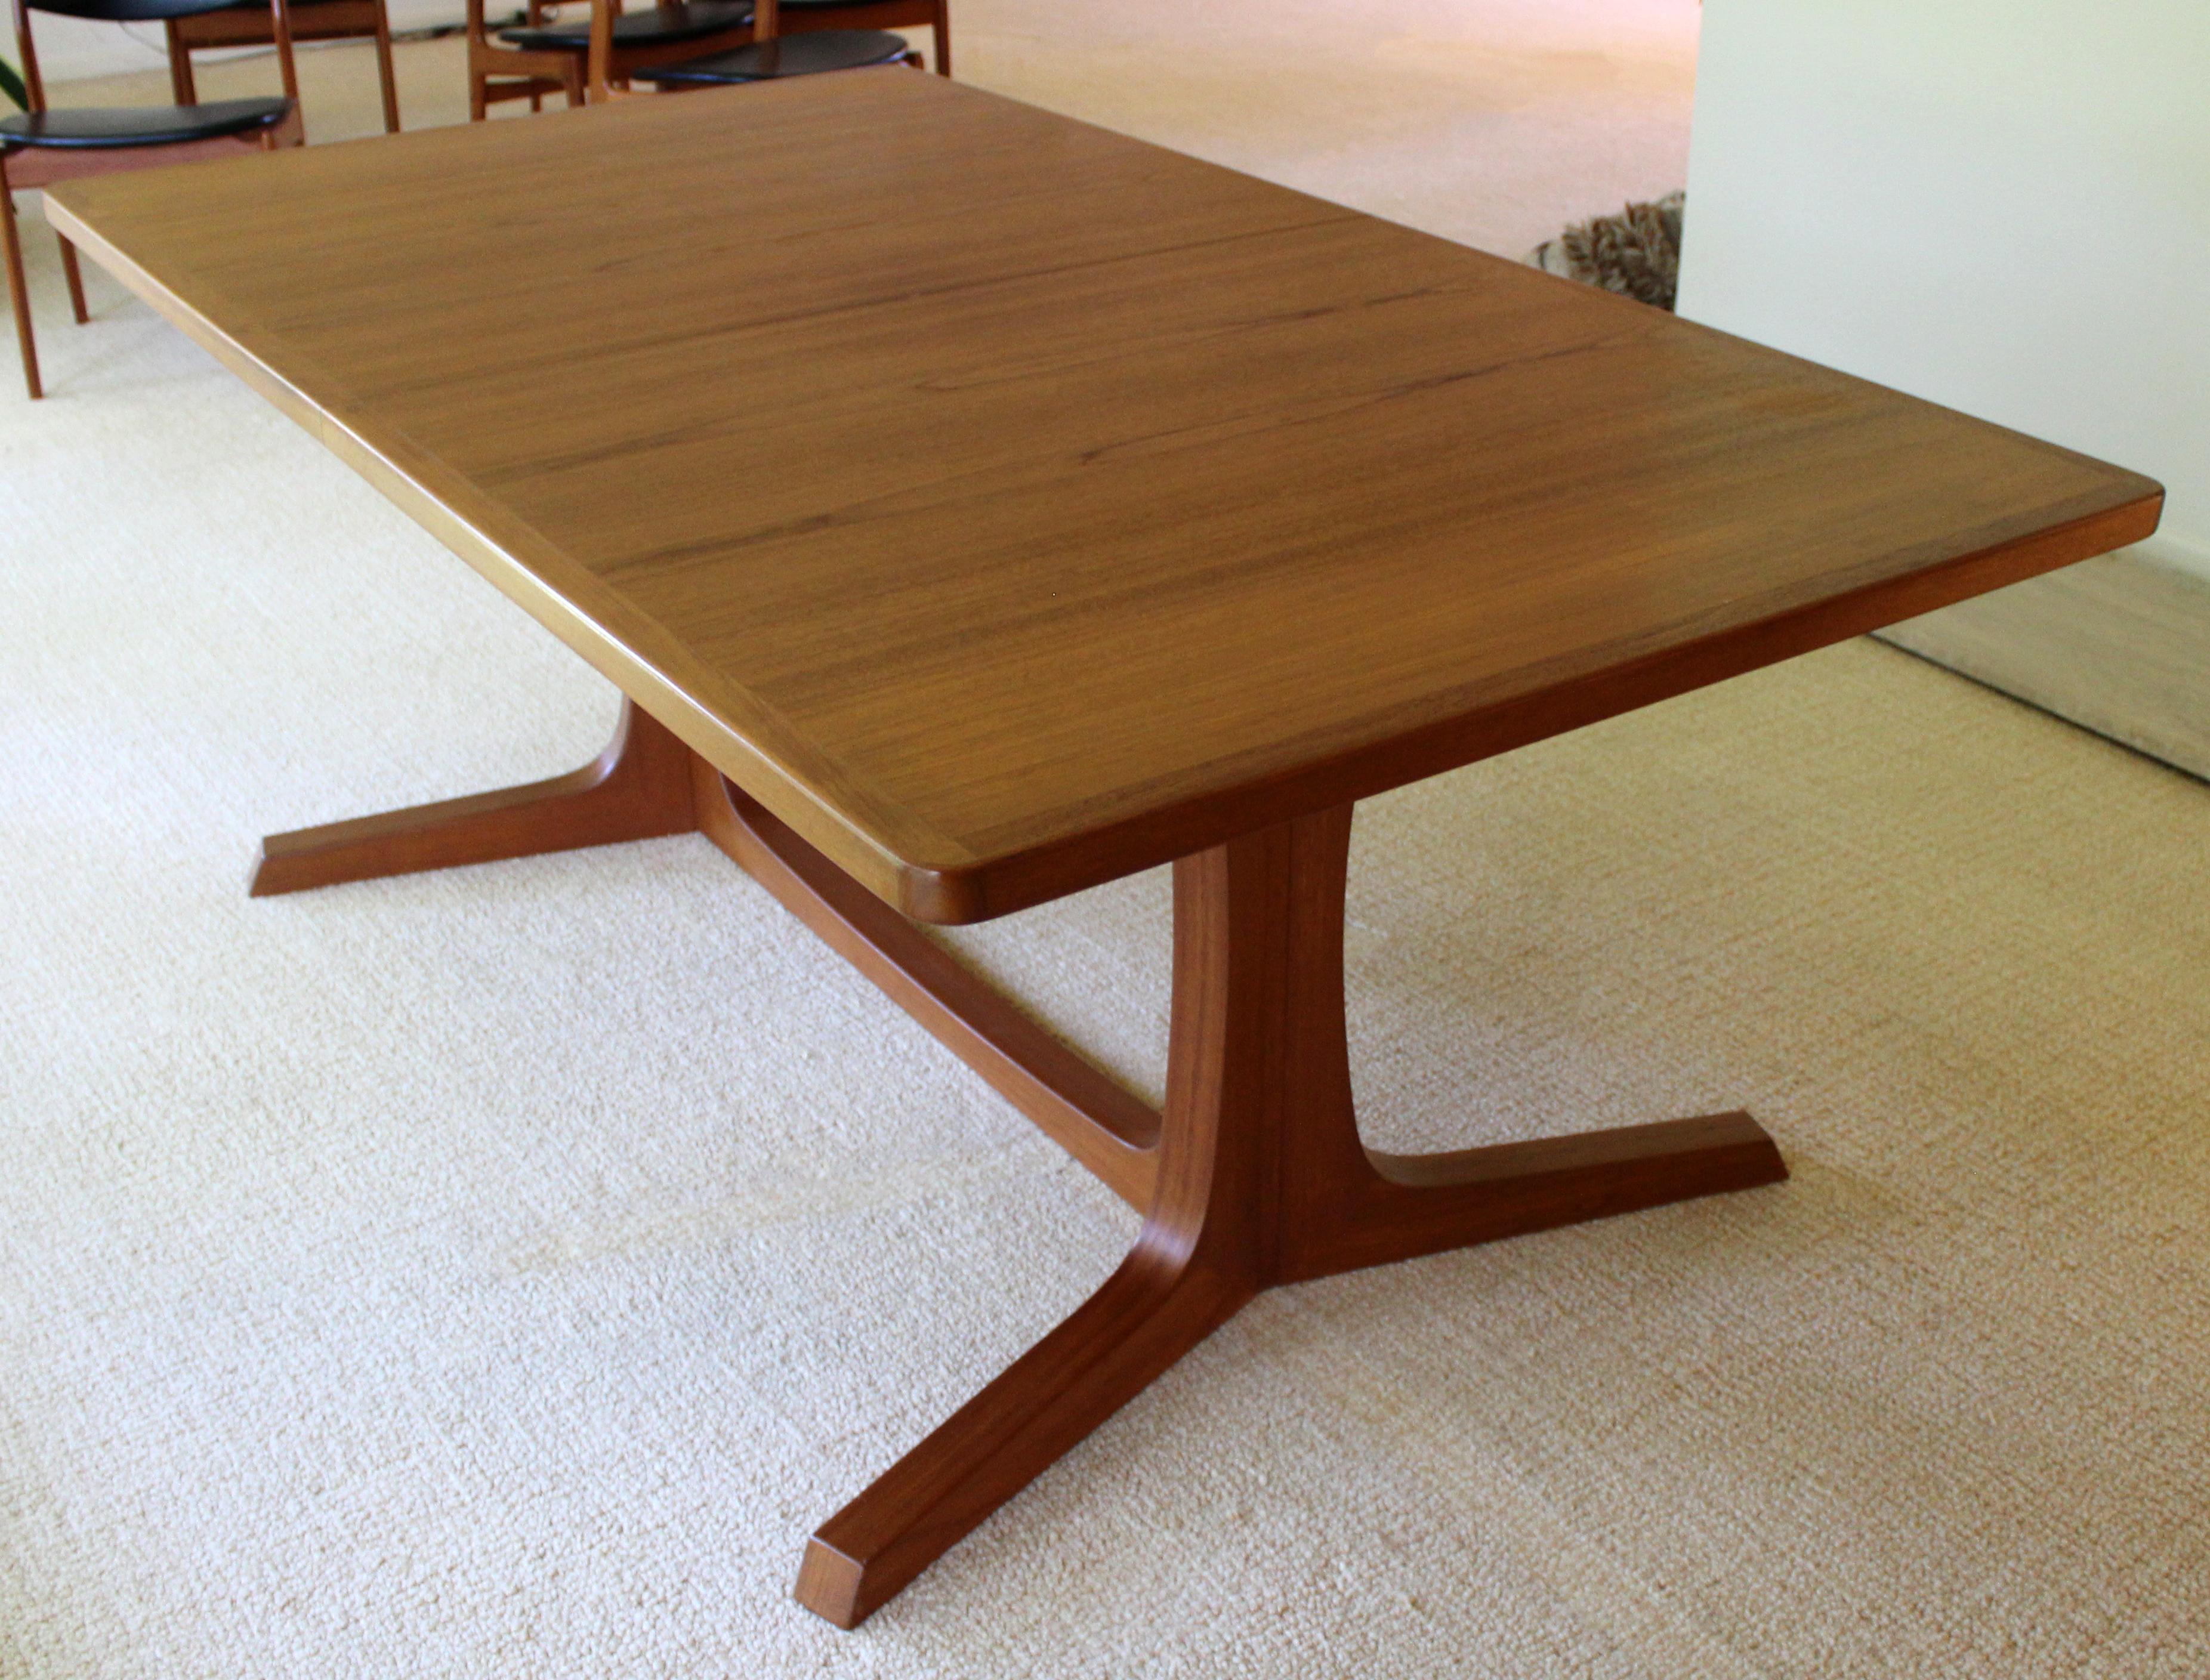 Mid-20th Century Mid-Century Modern Teak Expandable Dining Set Table, 2 Leaves, 6 Chairs Danish